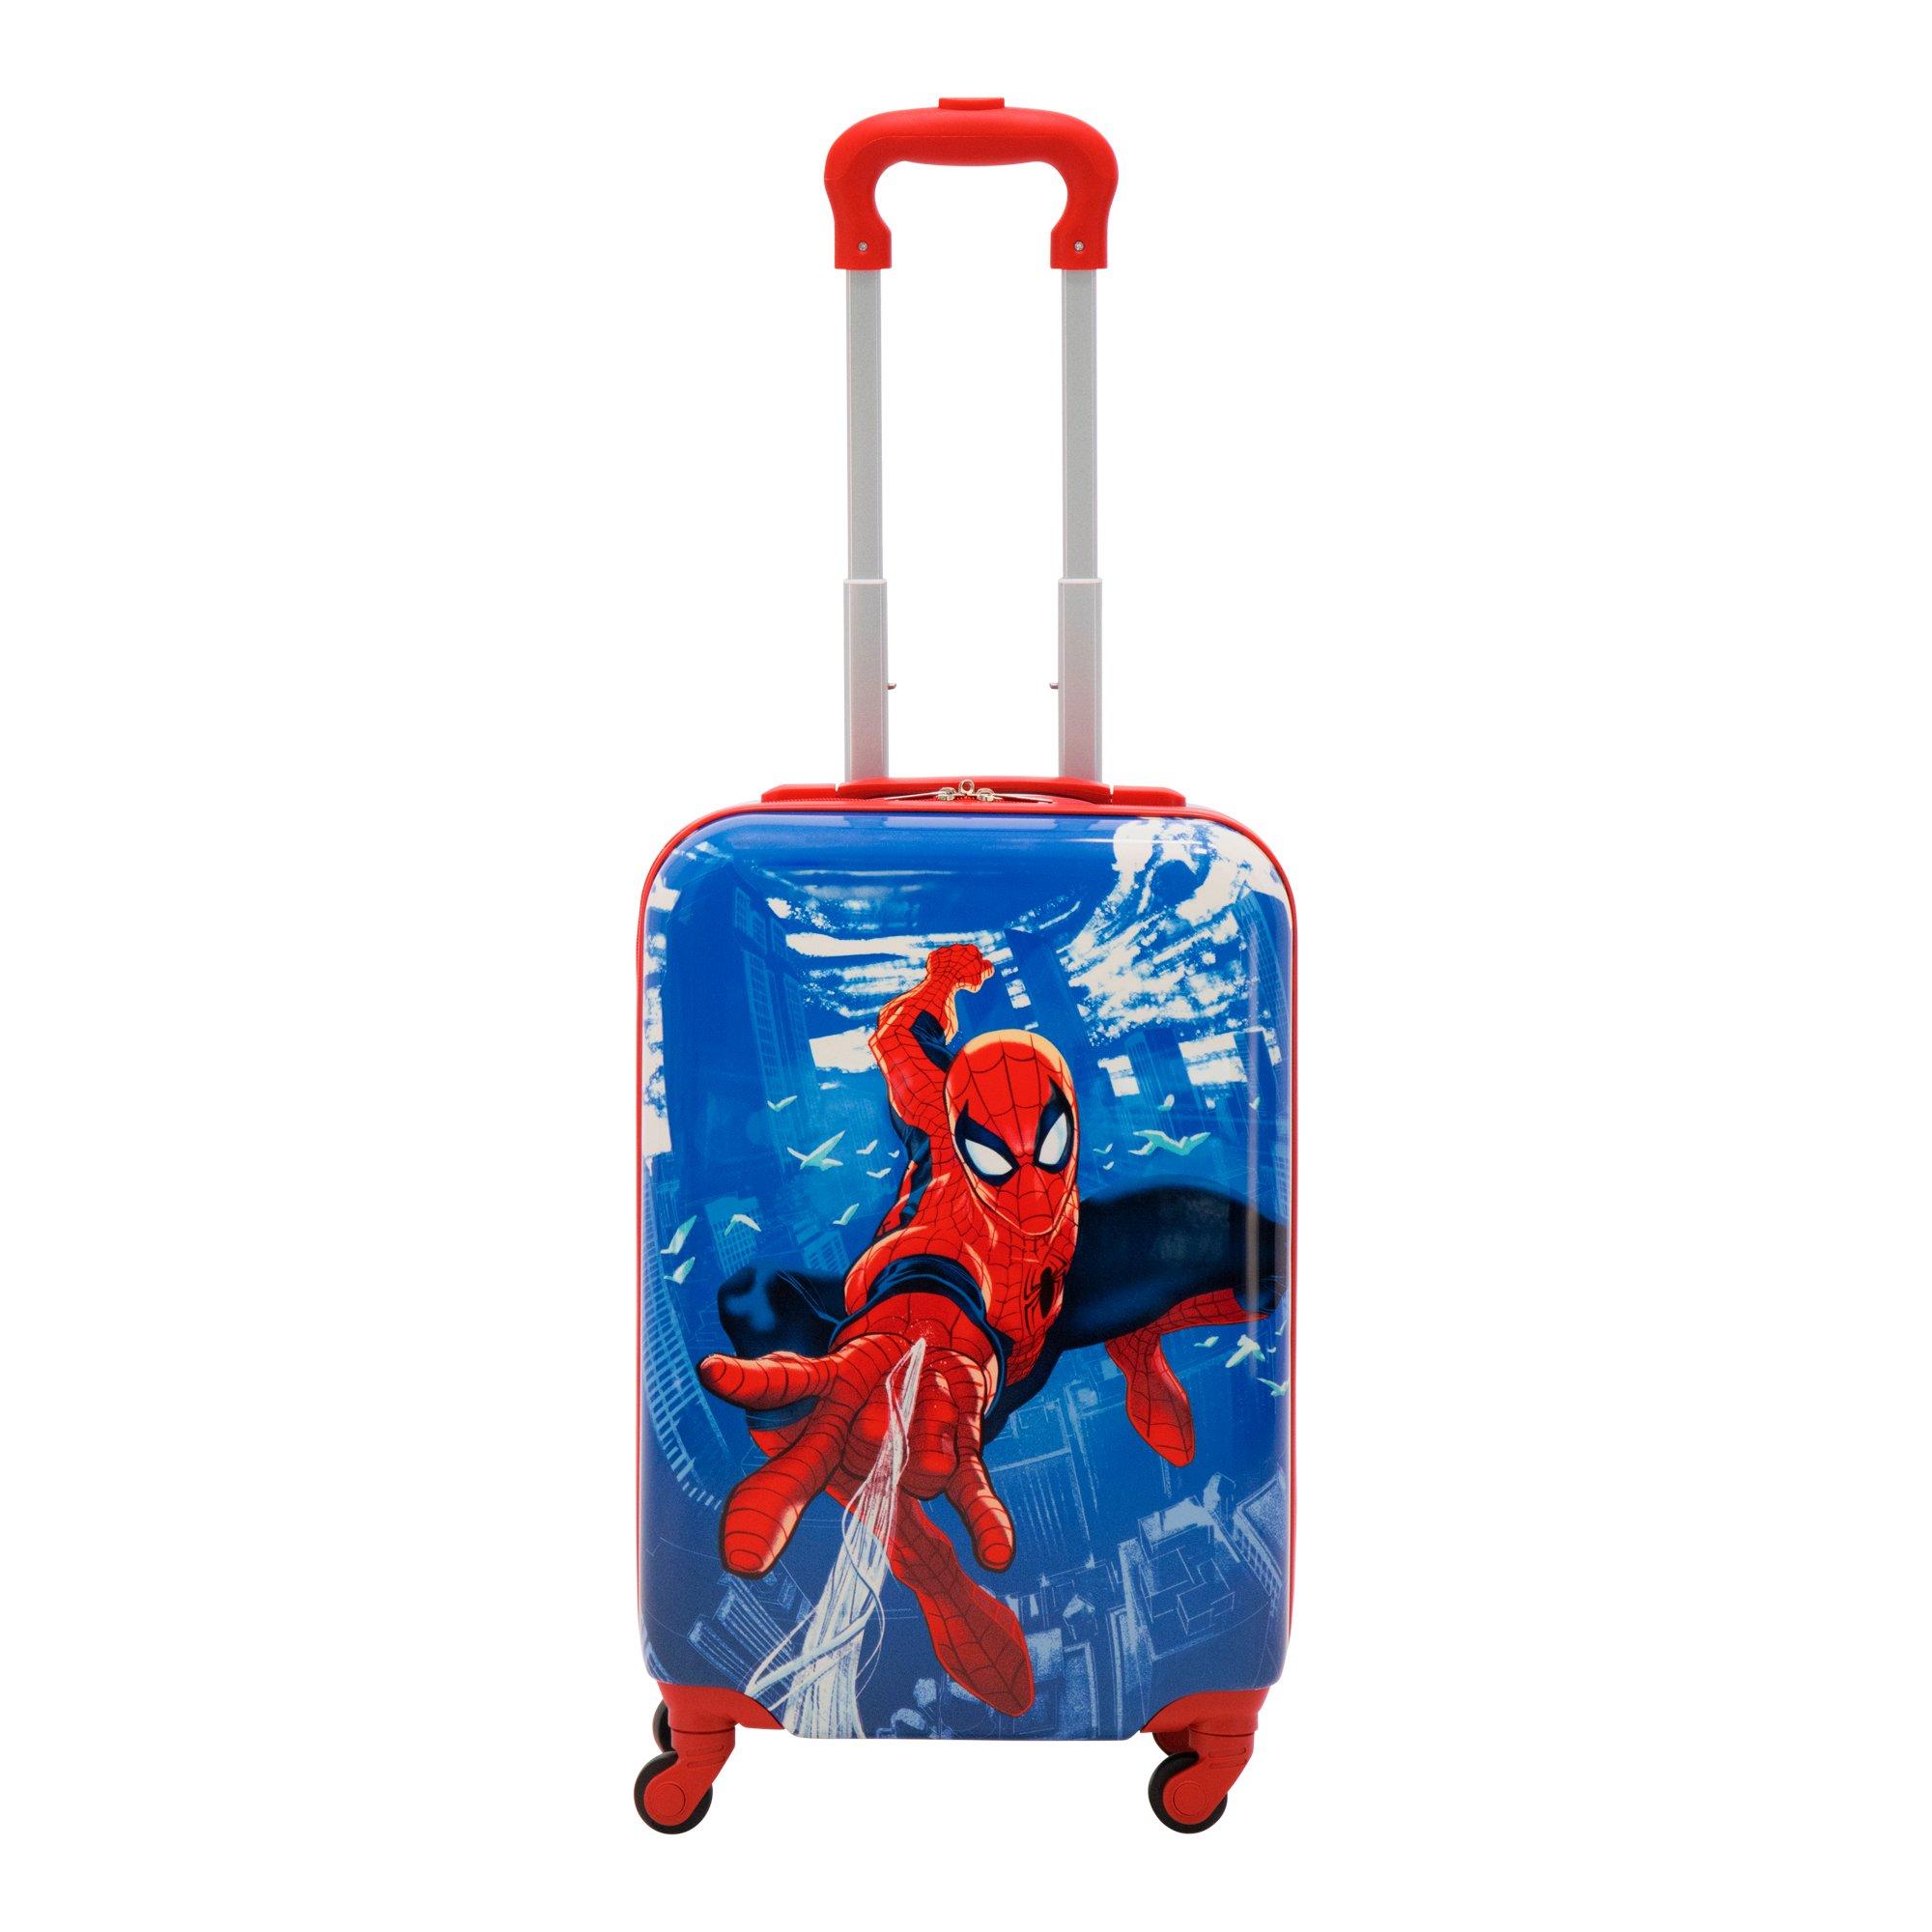 FUL Marvel Spiderman Web Slinging Kids 21-in Hard-Sided Carry-On Luggage, Concept One